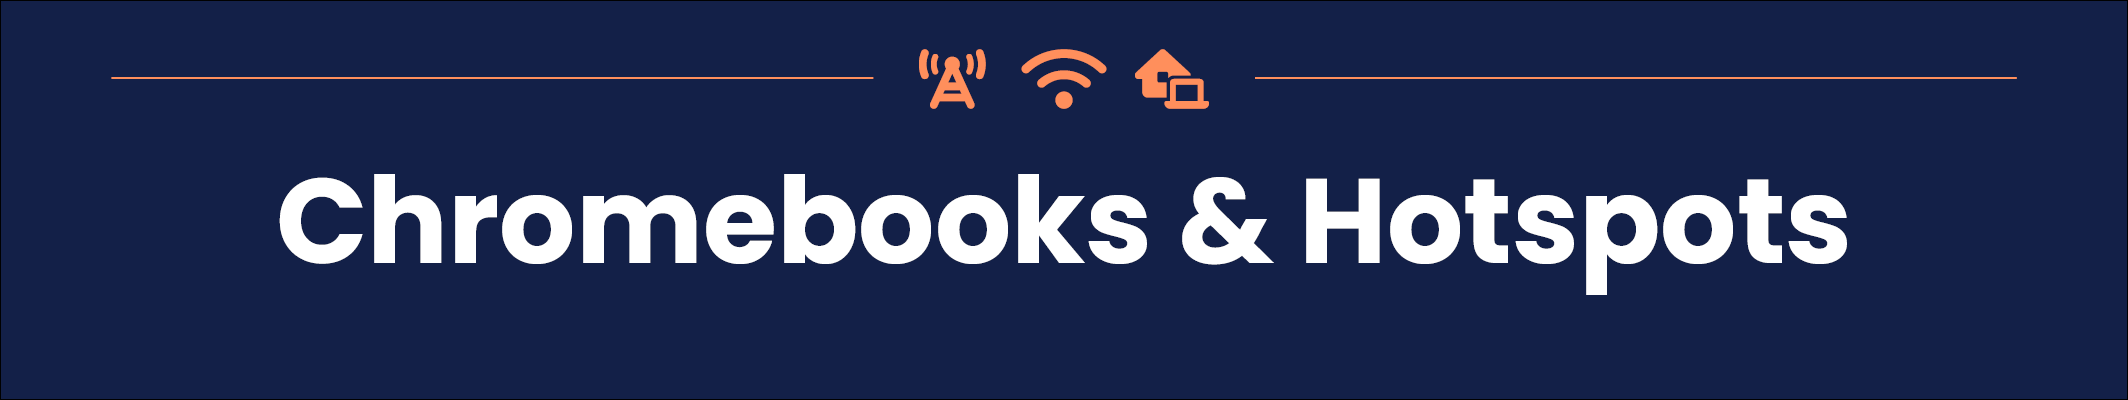 Chromebooks and hotspots in a white font on a dark blue background with orange icons of wifi tower, wifi and a computer